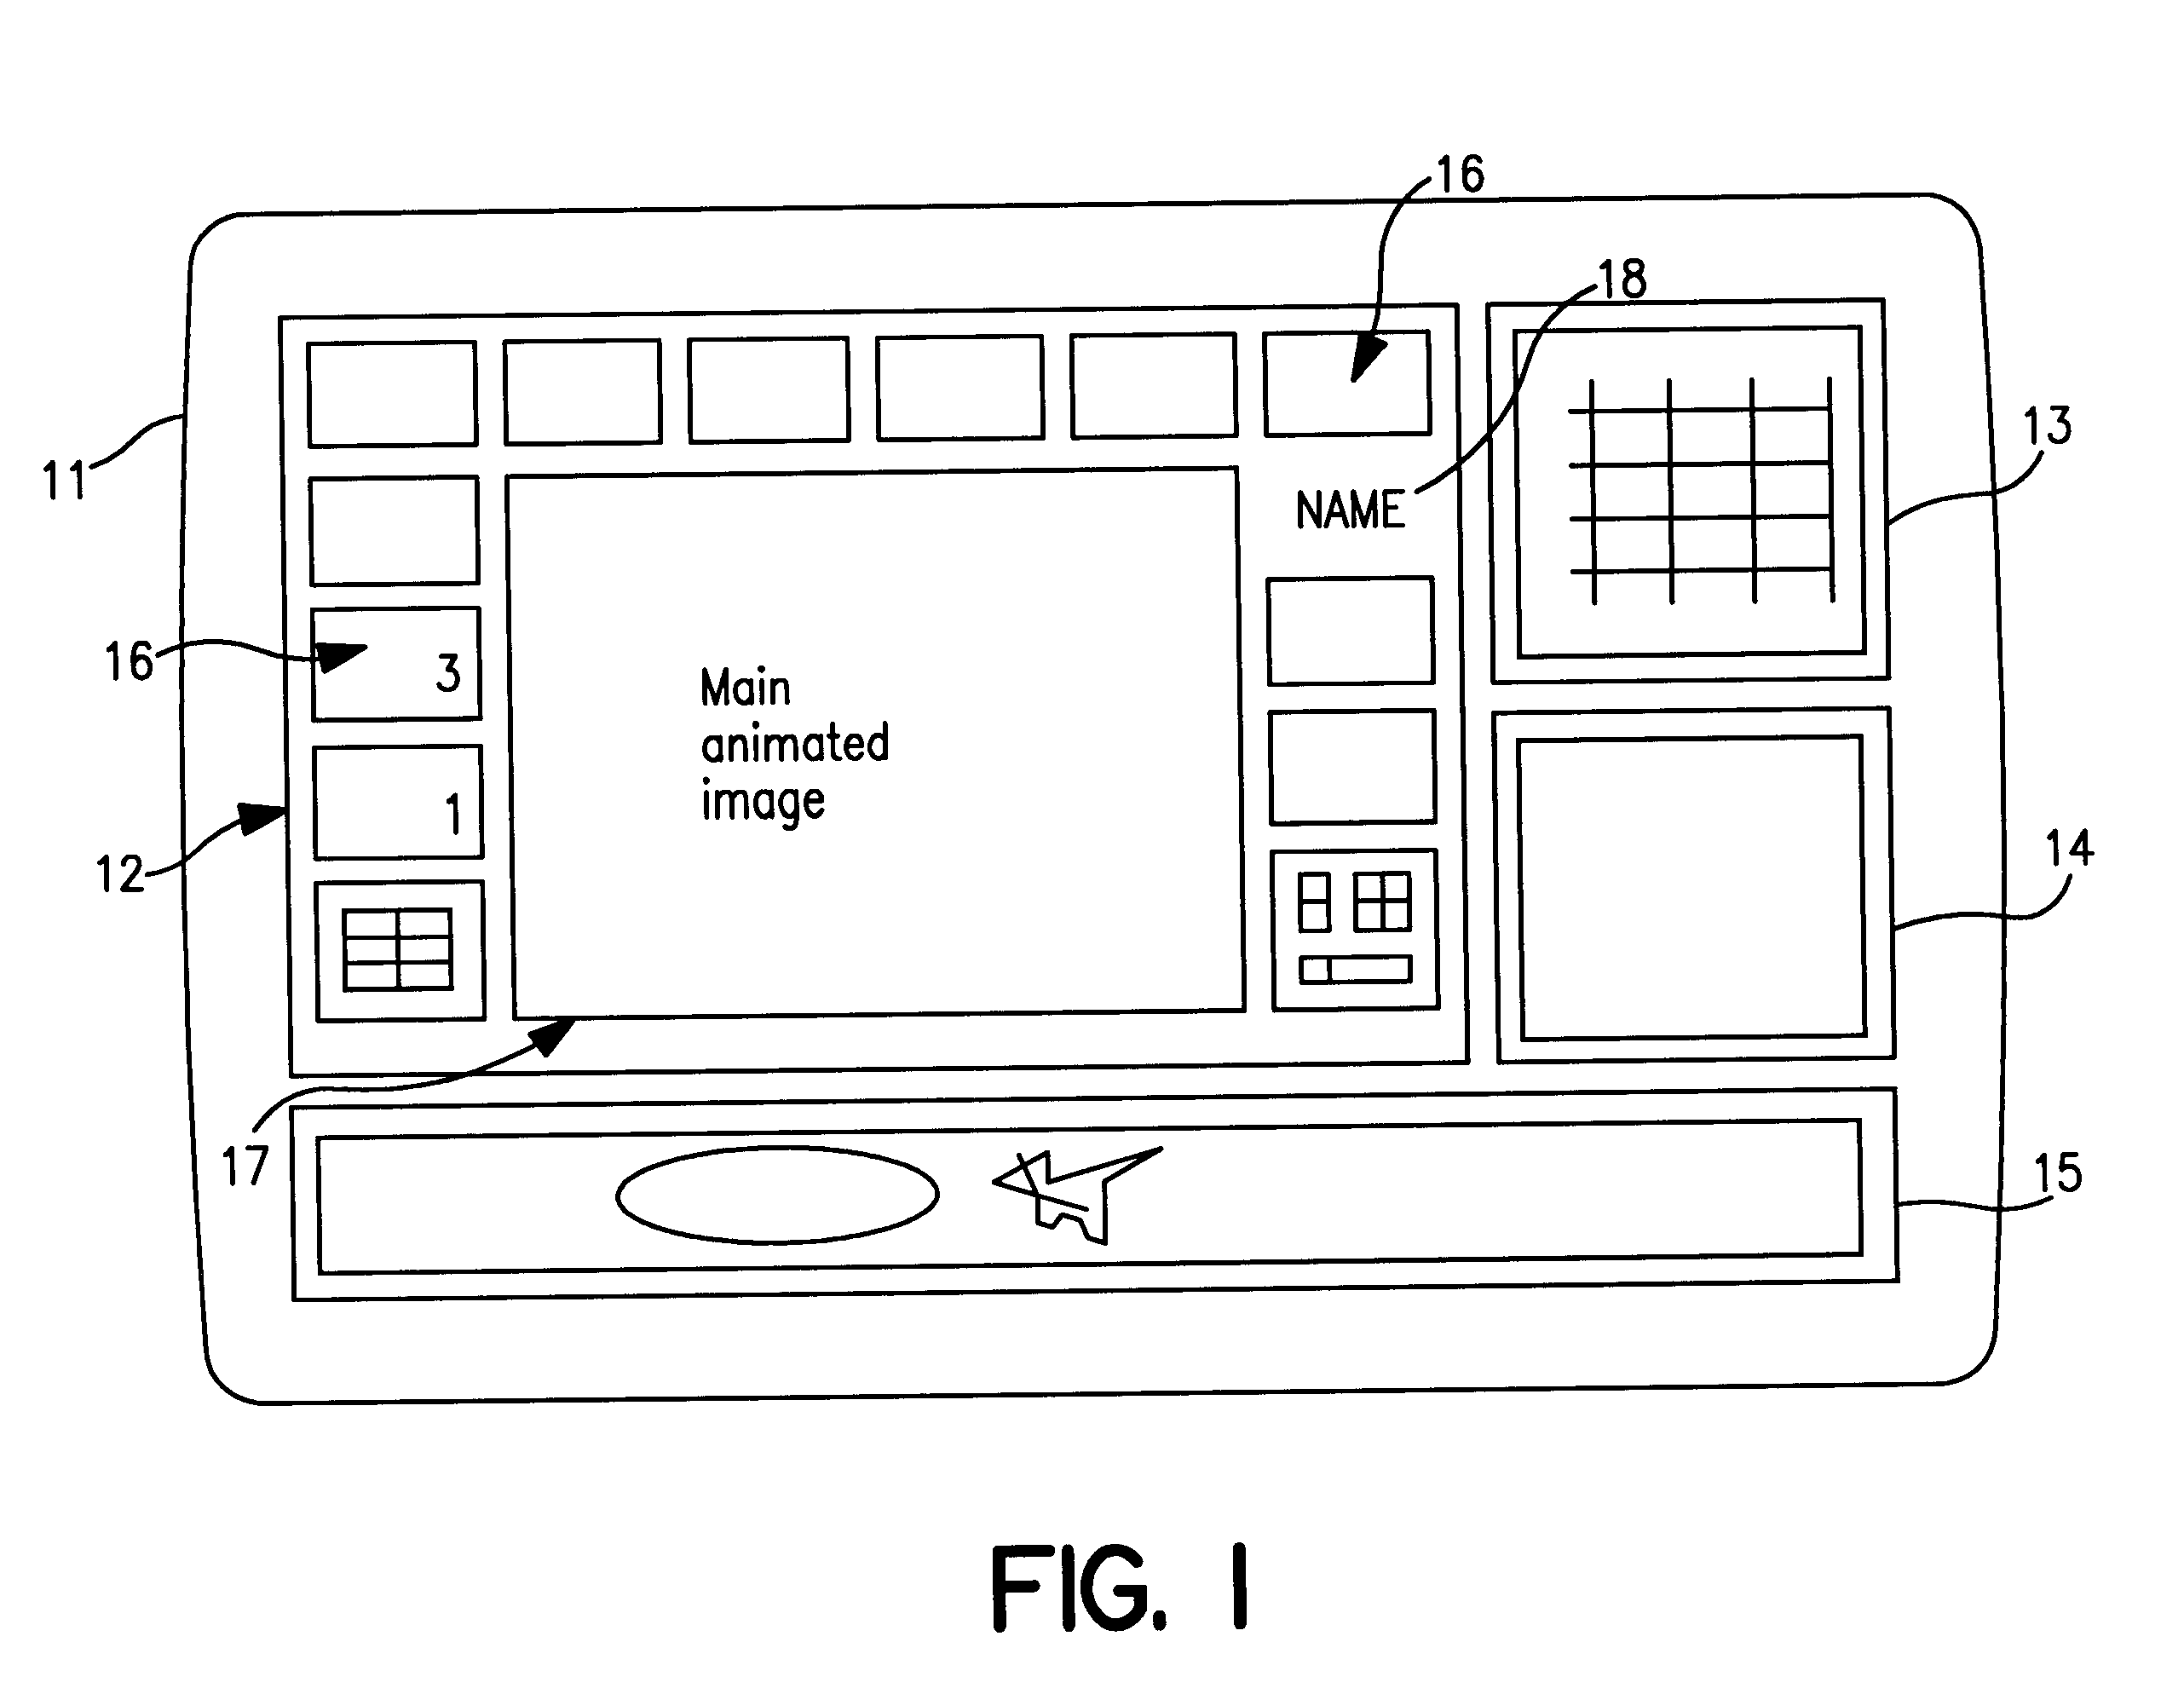 Stand alone routing switch and videoconferencing system using the stand alone routing switch